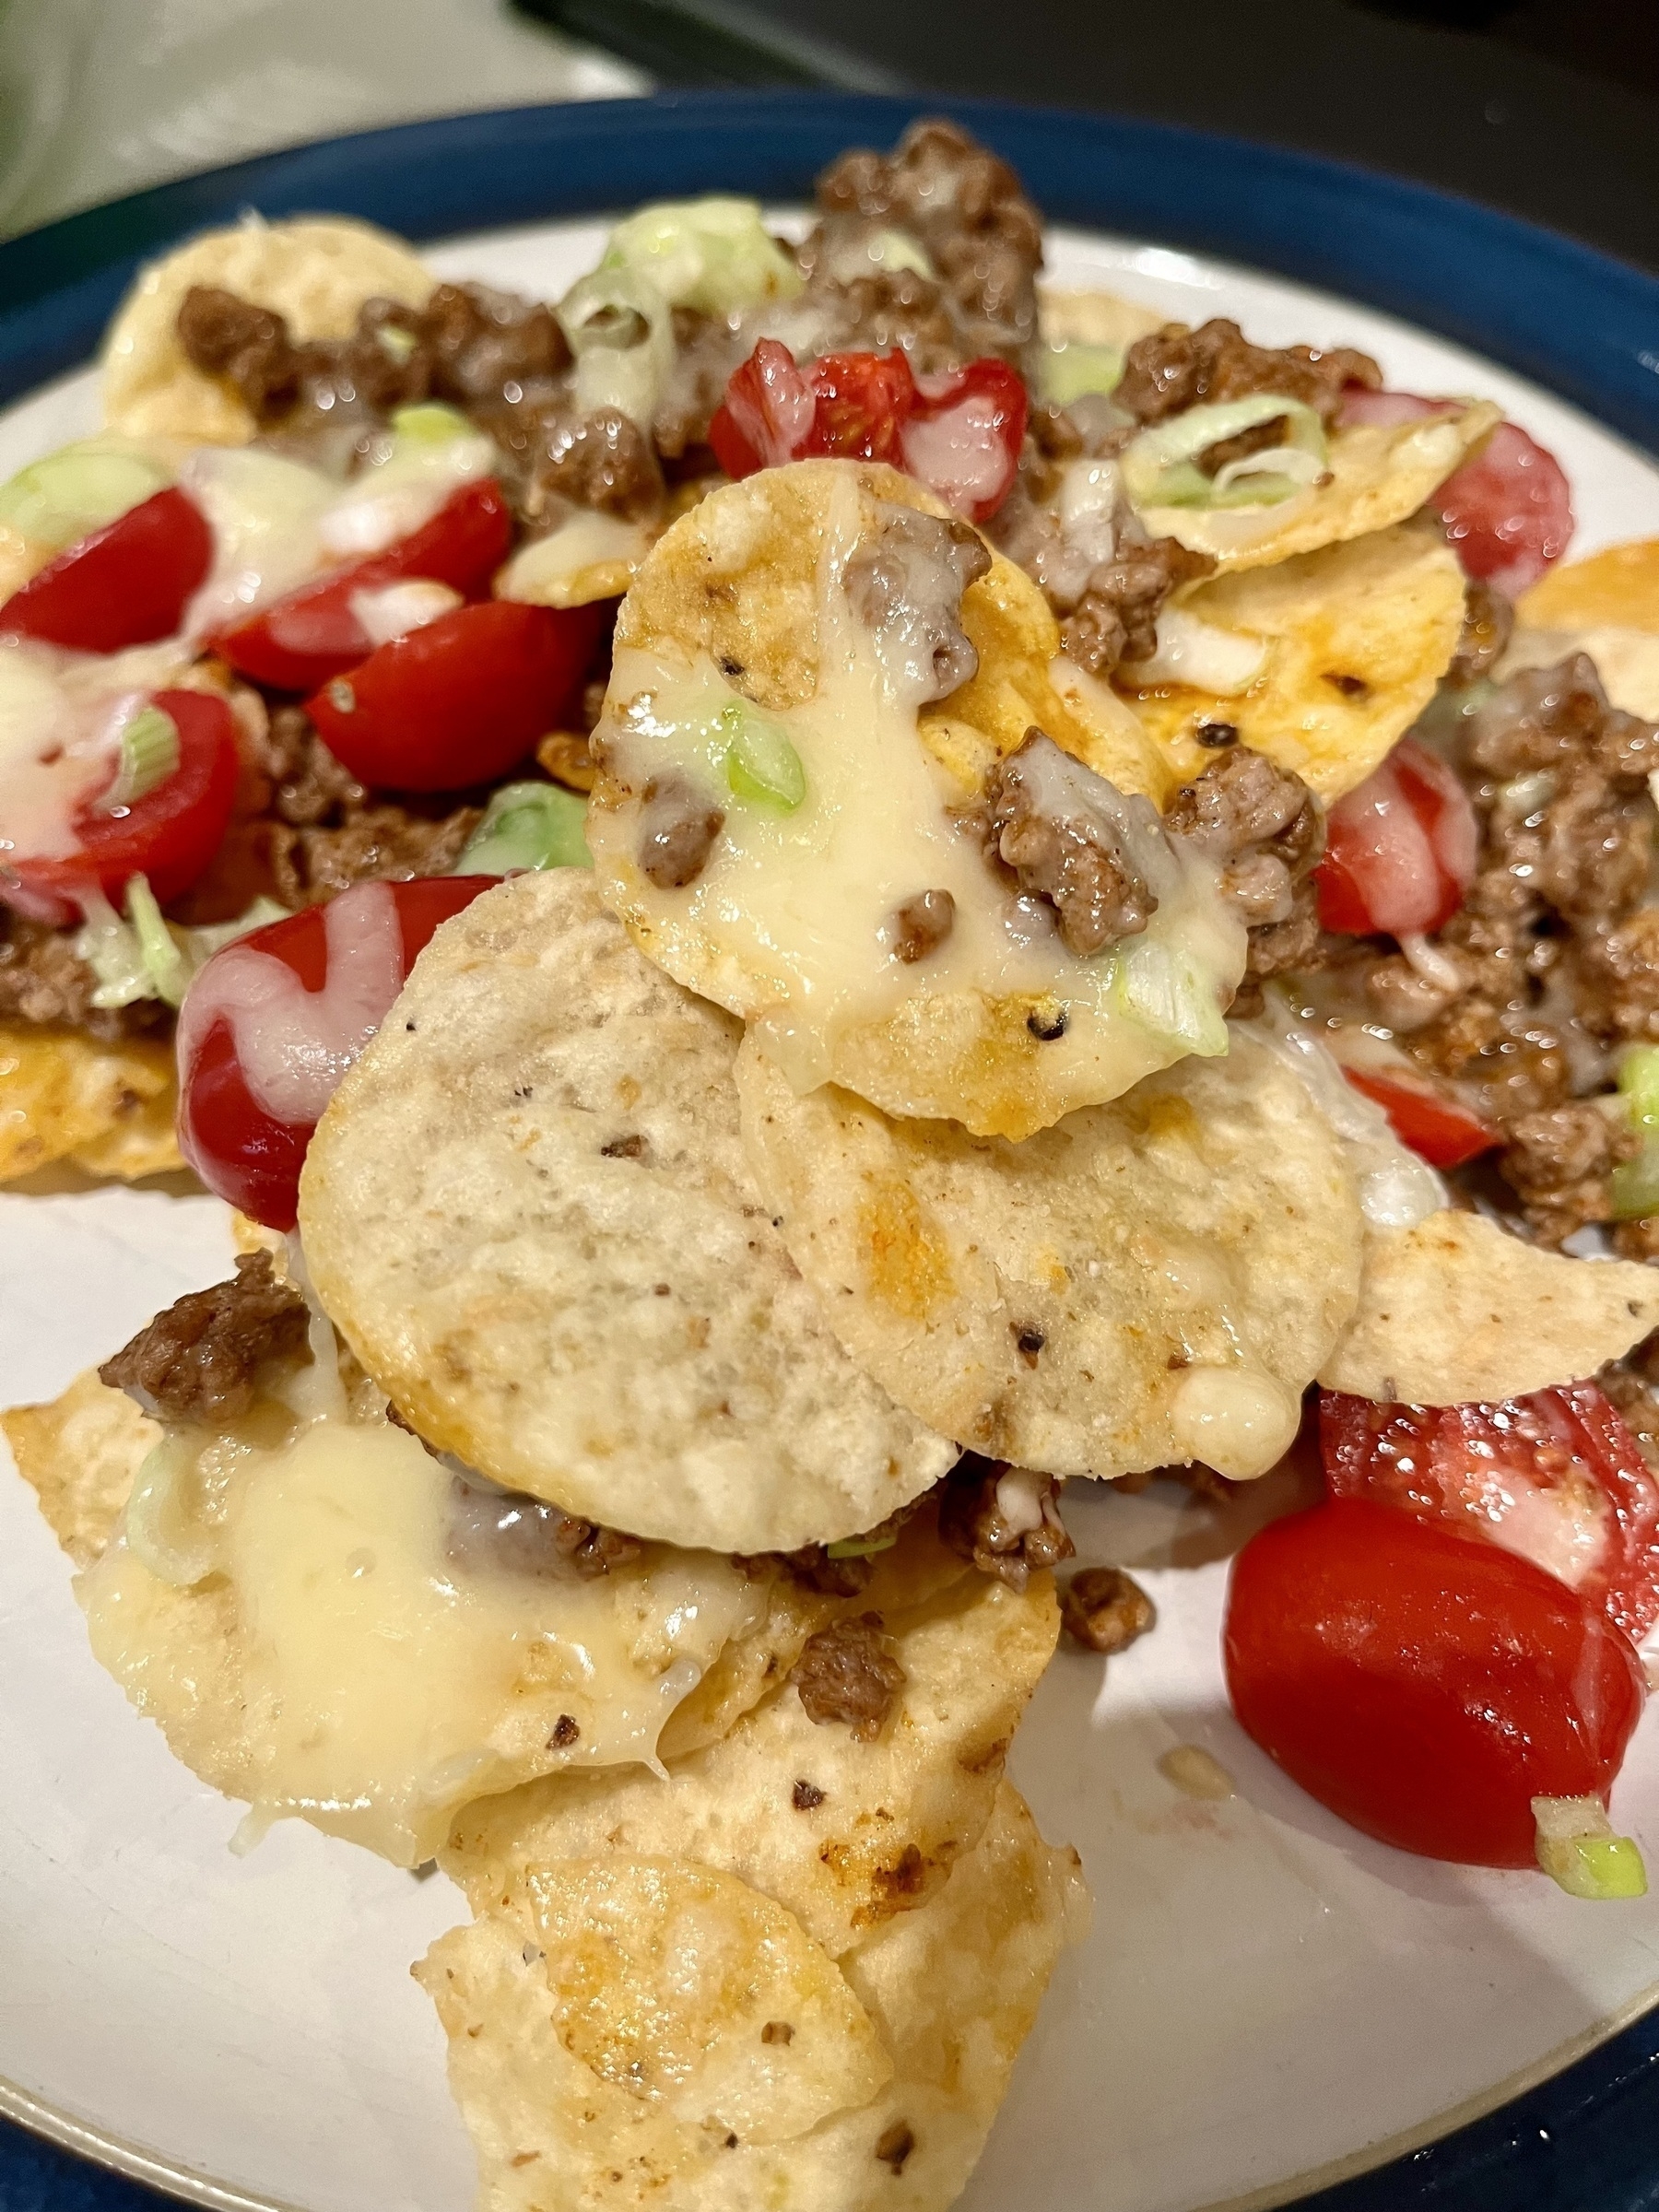 A plate of nachos topped with melted cheese, ground beef, diced tomatoes, and sliced green onions, served on a white plate with a blue rim.